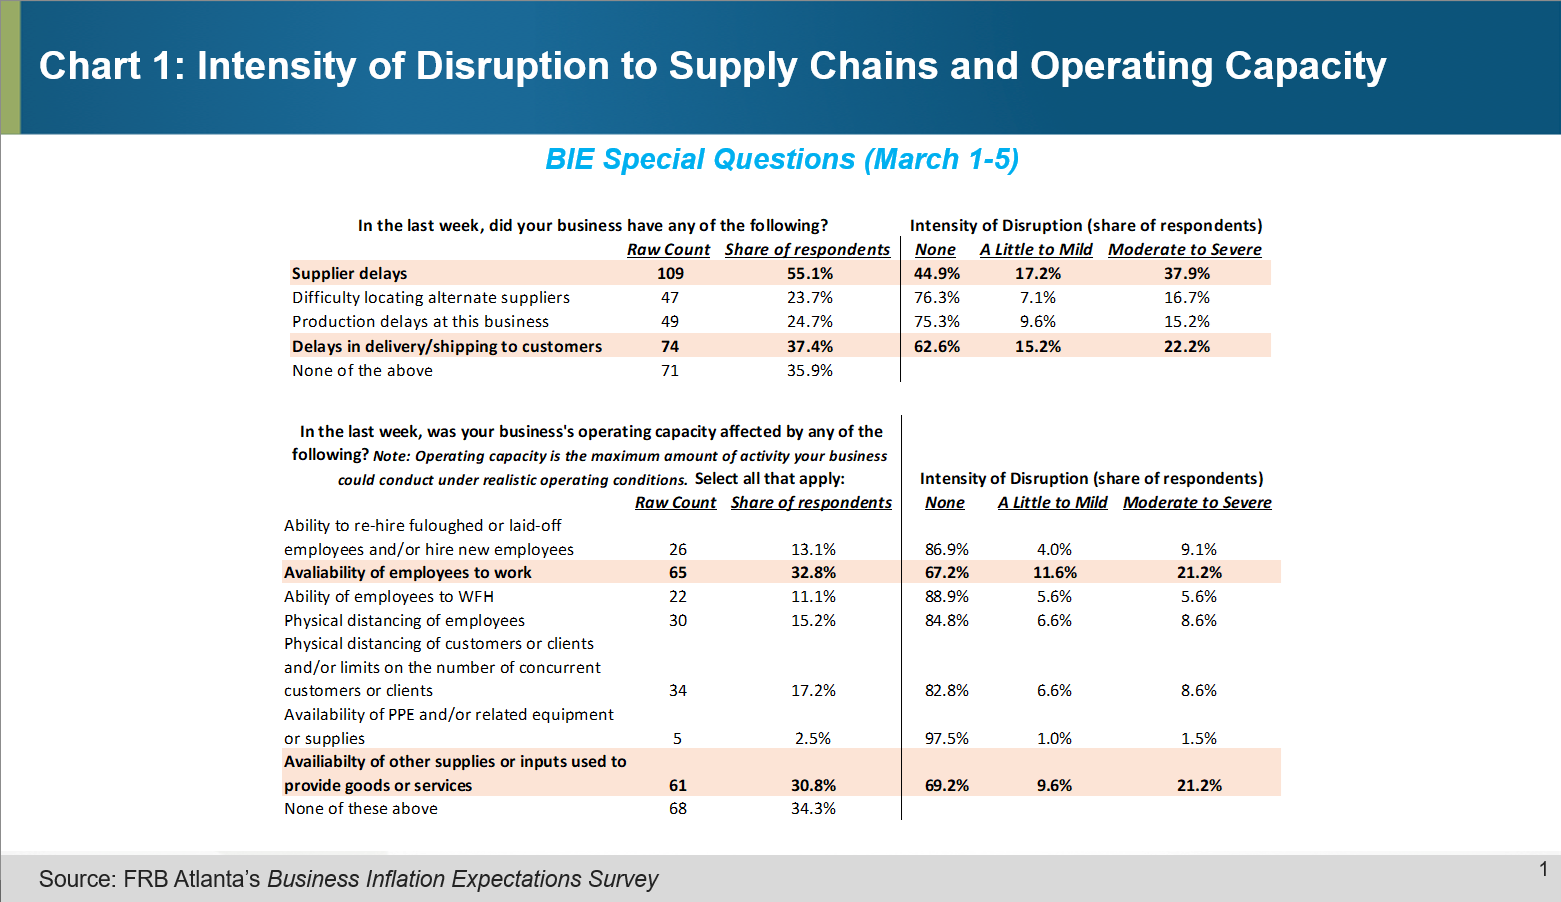 Chart 1 of 4: Intensity of Disruption to Supply Chains and Operating Capacity